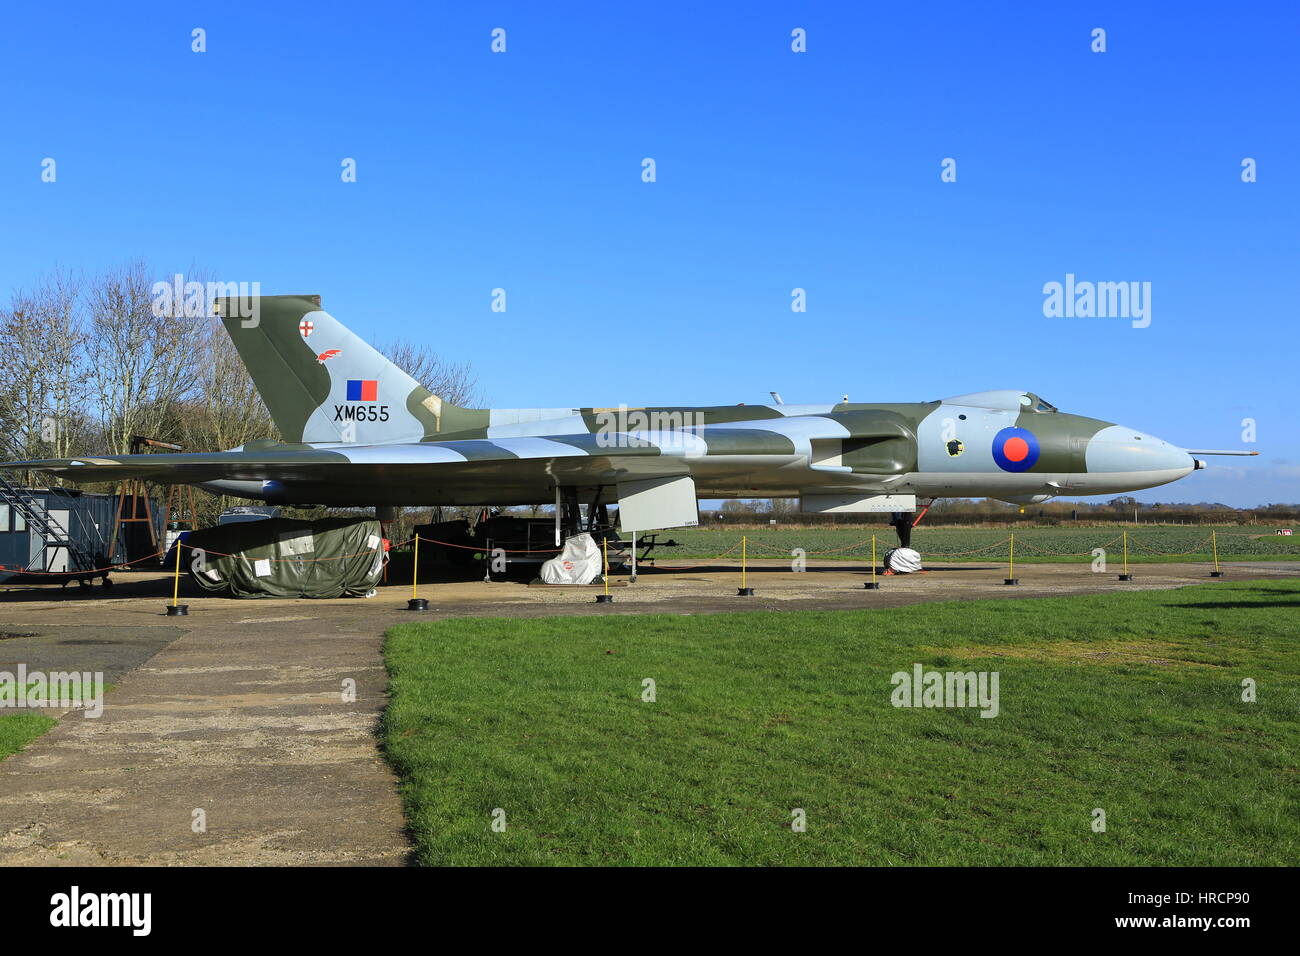 This Vulcan is at Wellesbourne Mountfield airfield in Warwickshire and it performs fast ground taxi runs during the year to crowds of followers. Stock Photo